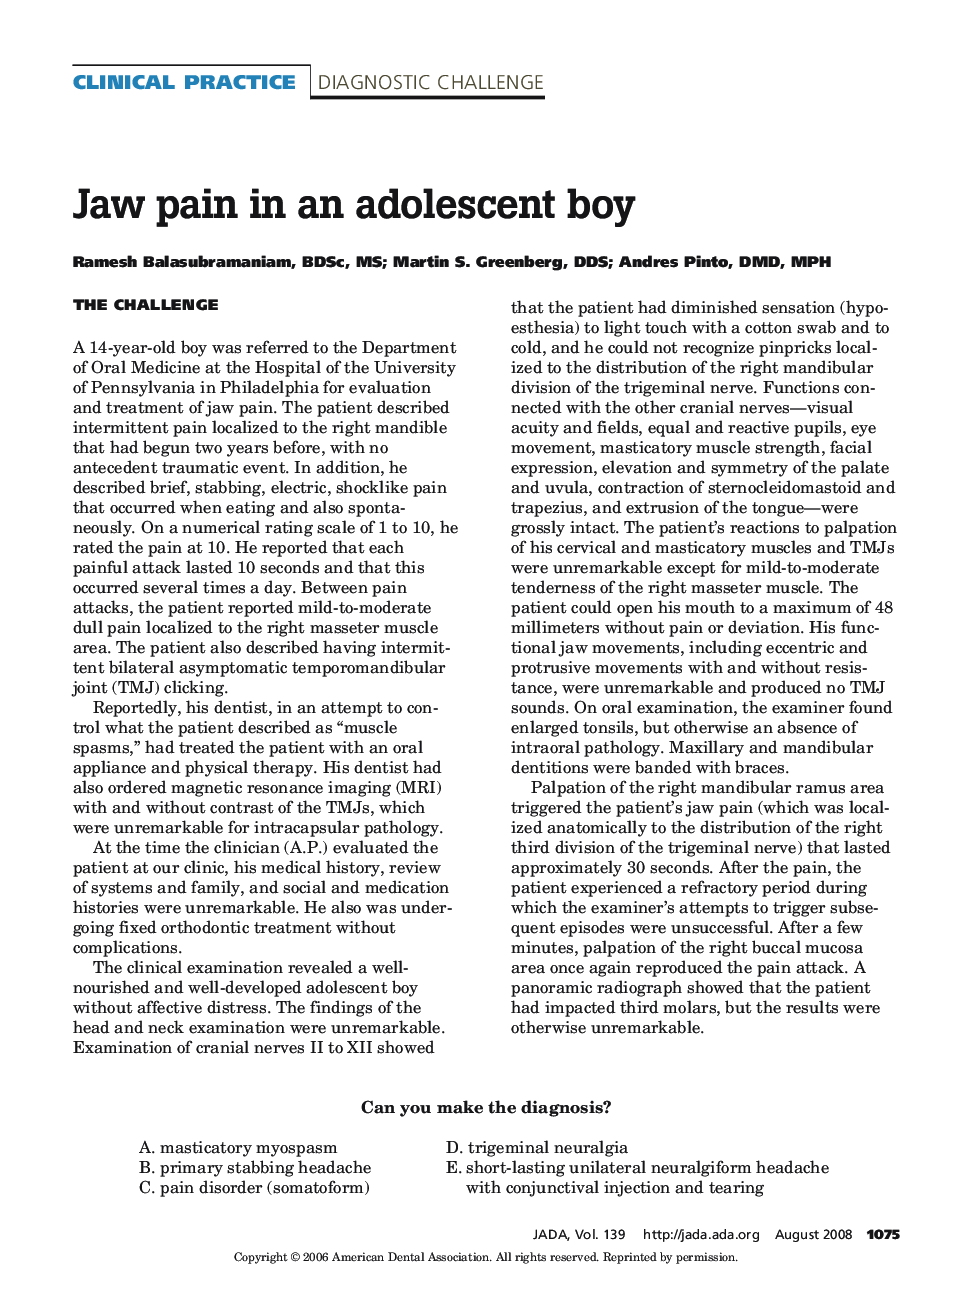 Jaw Pain in an Adolescent Boy